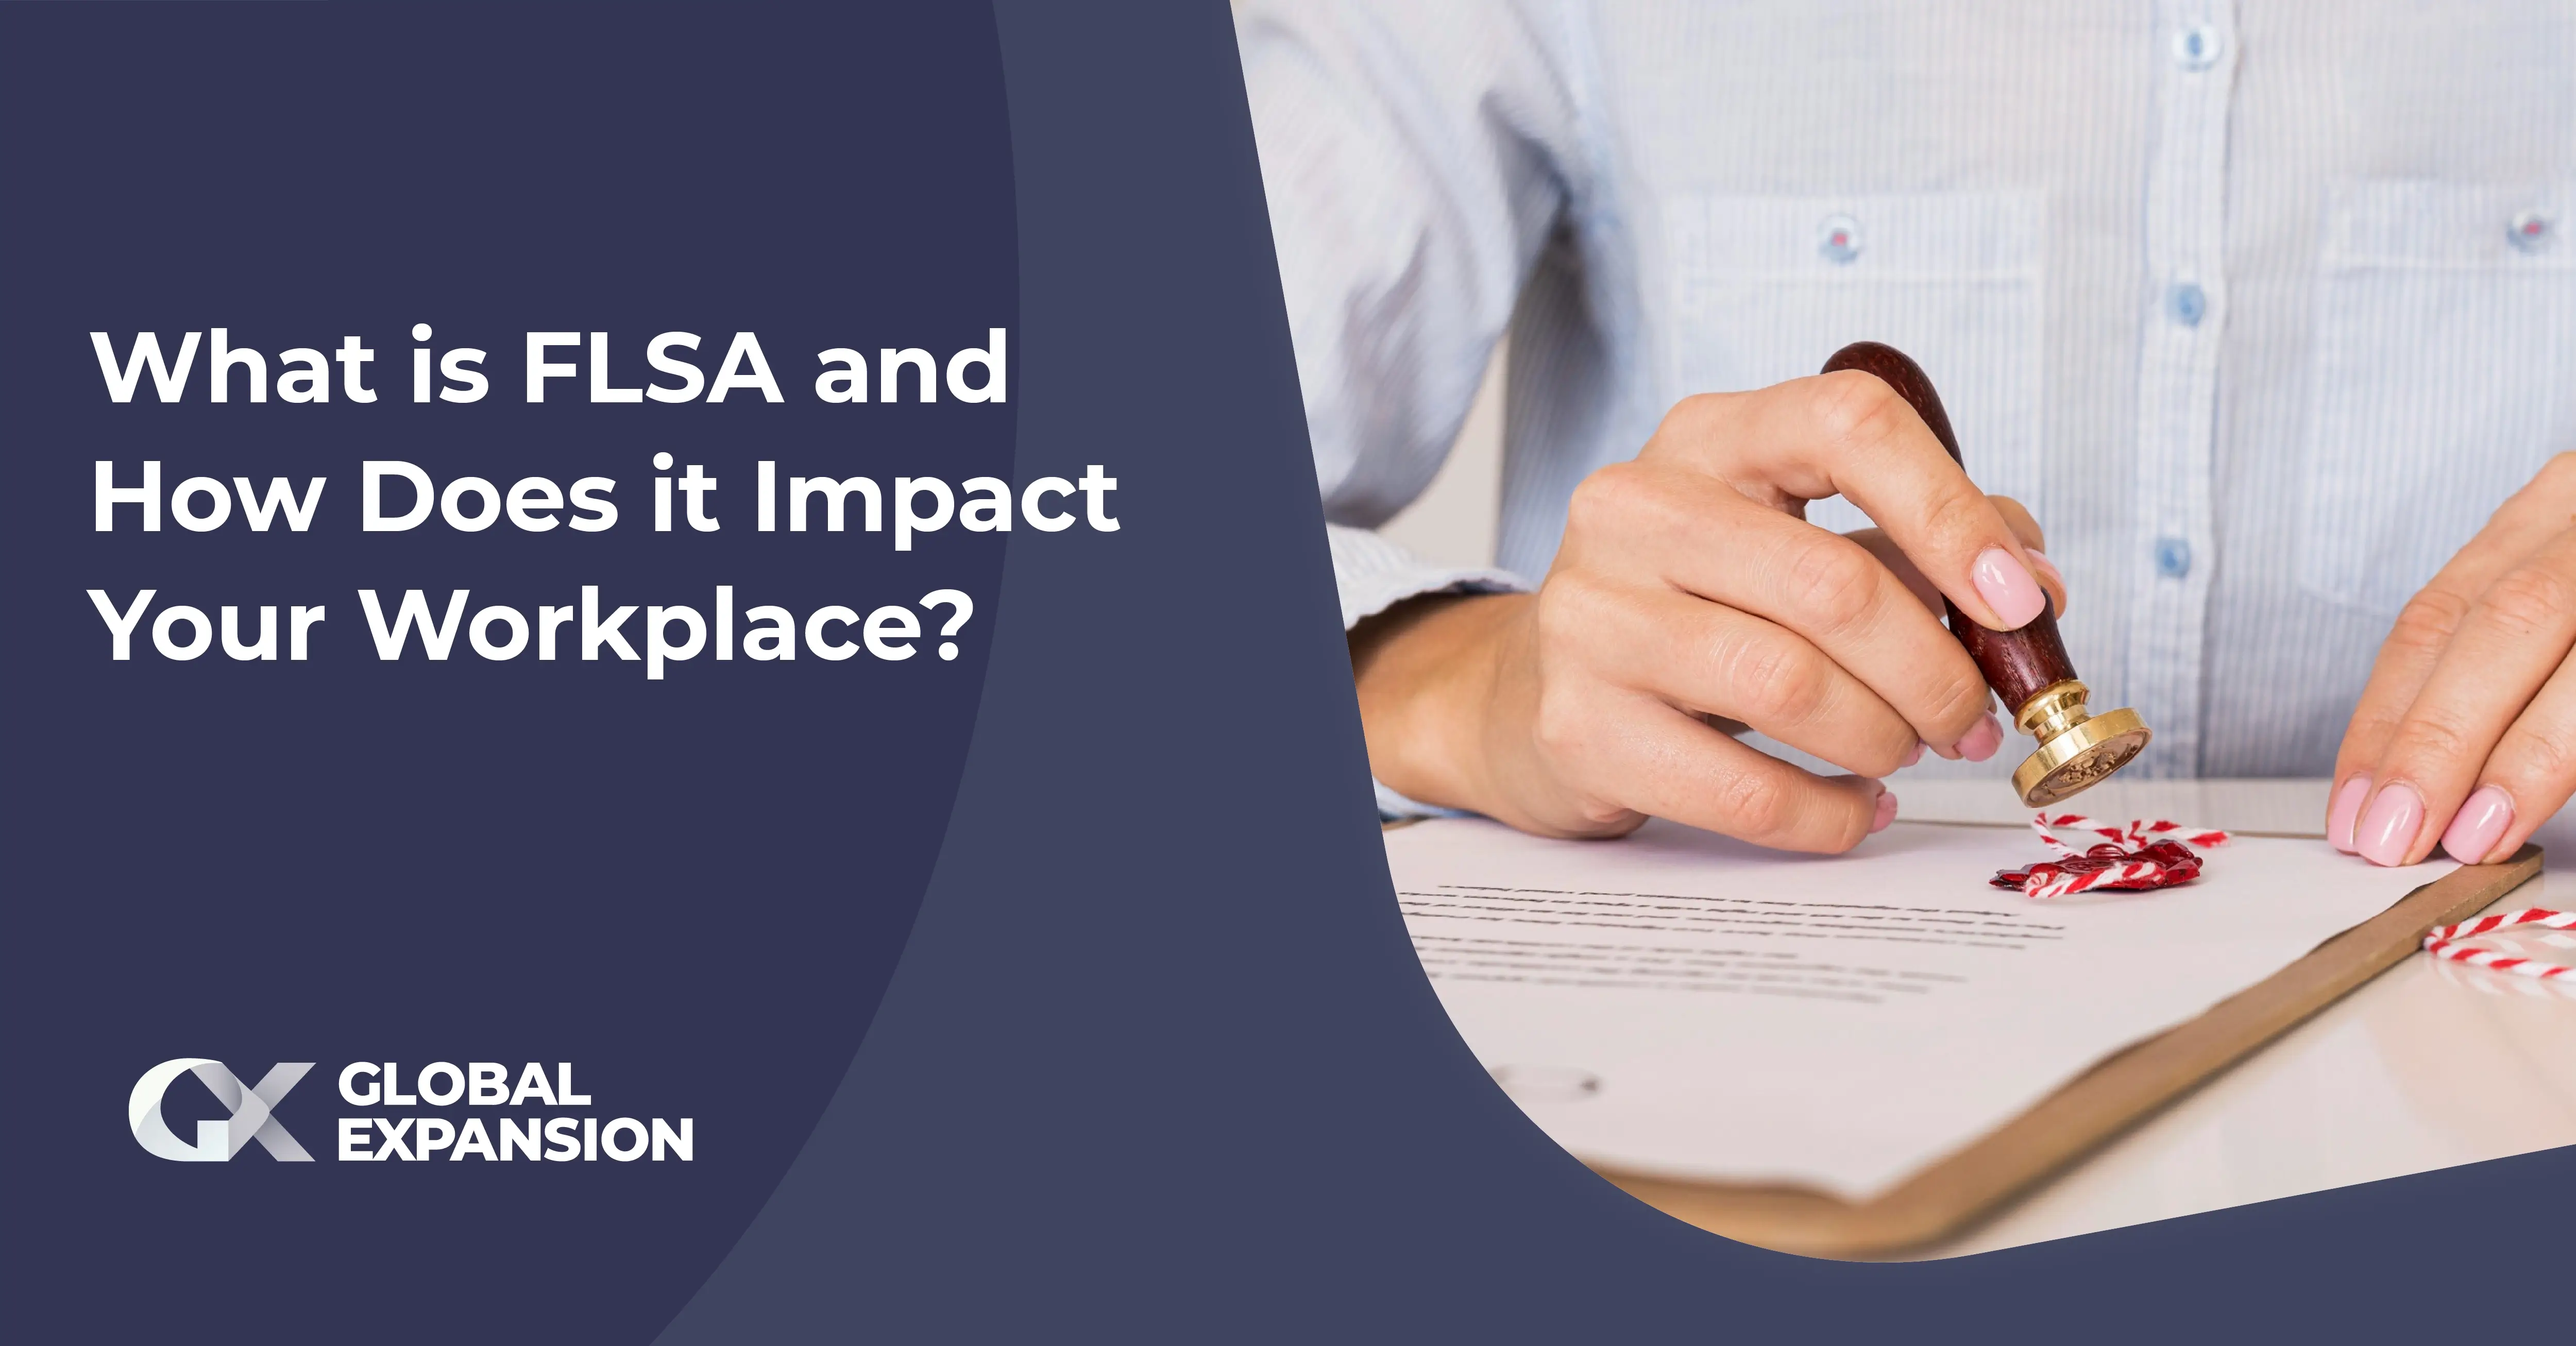 What is FLSA and How Does it Impact Your Workplace?